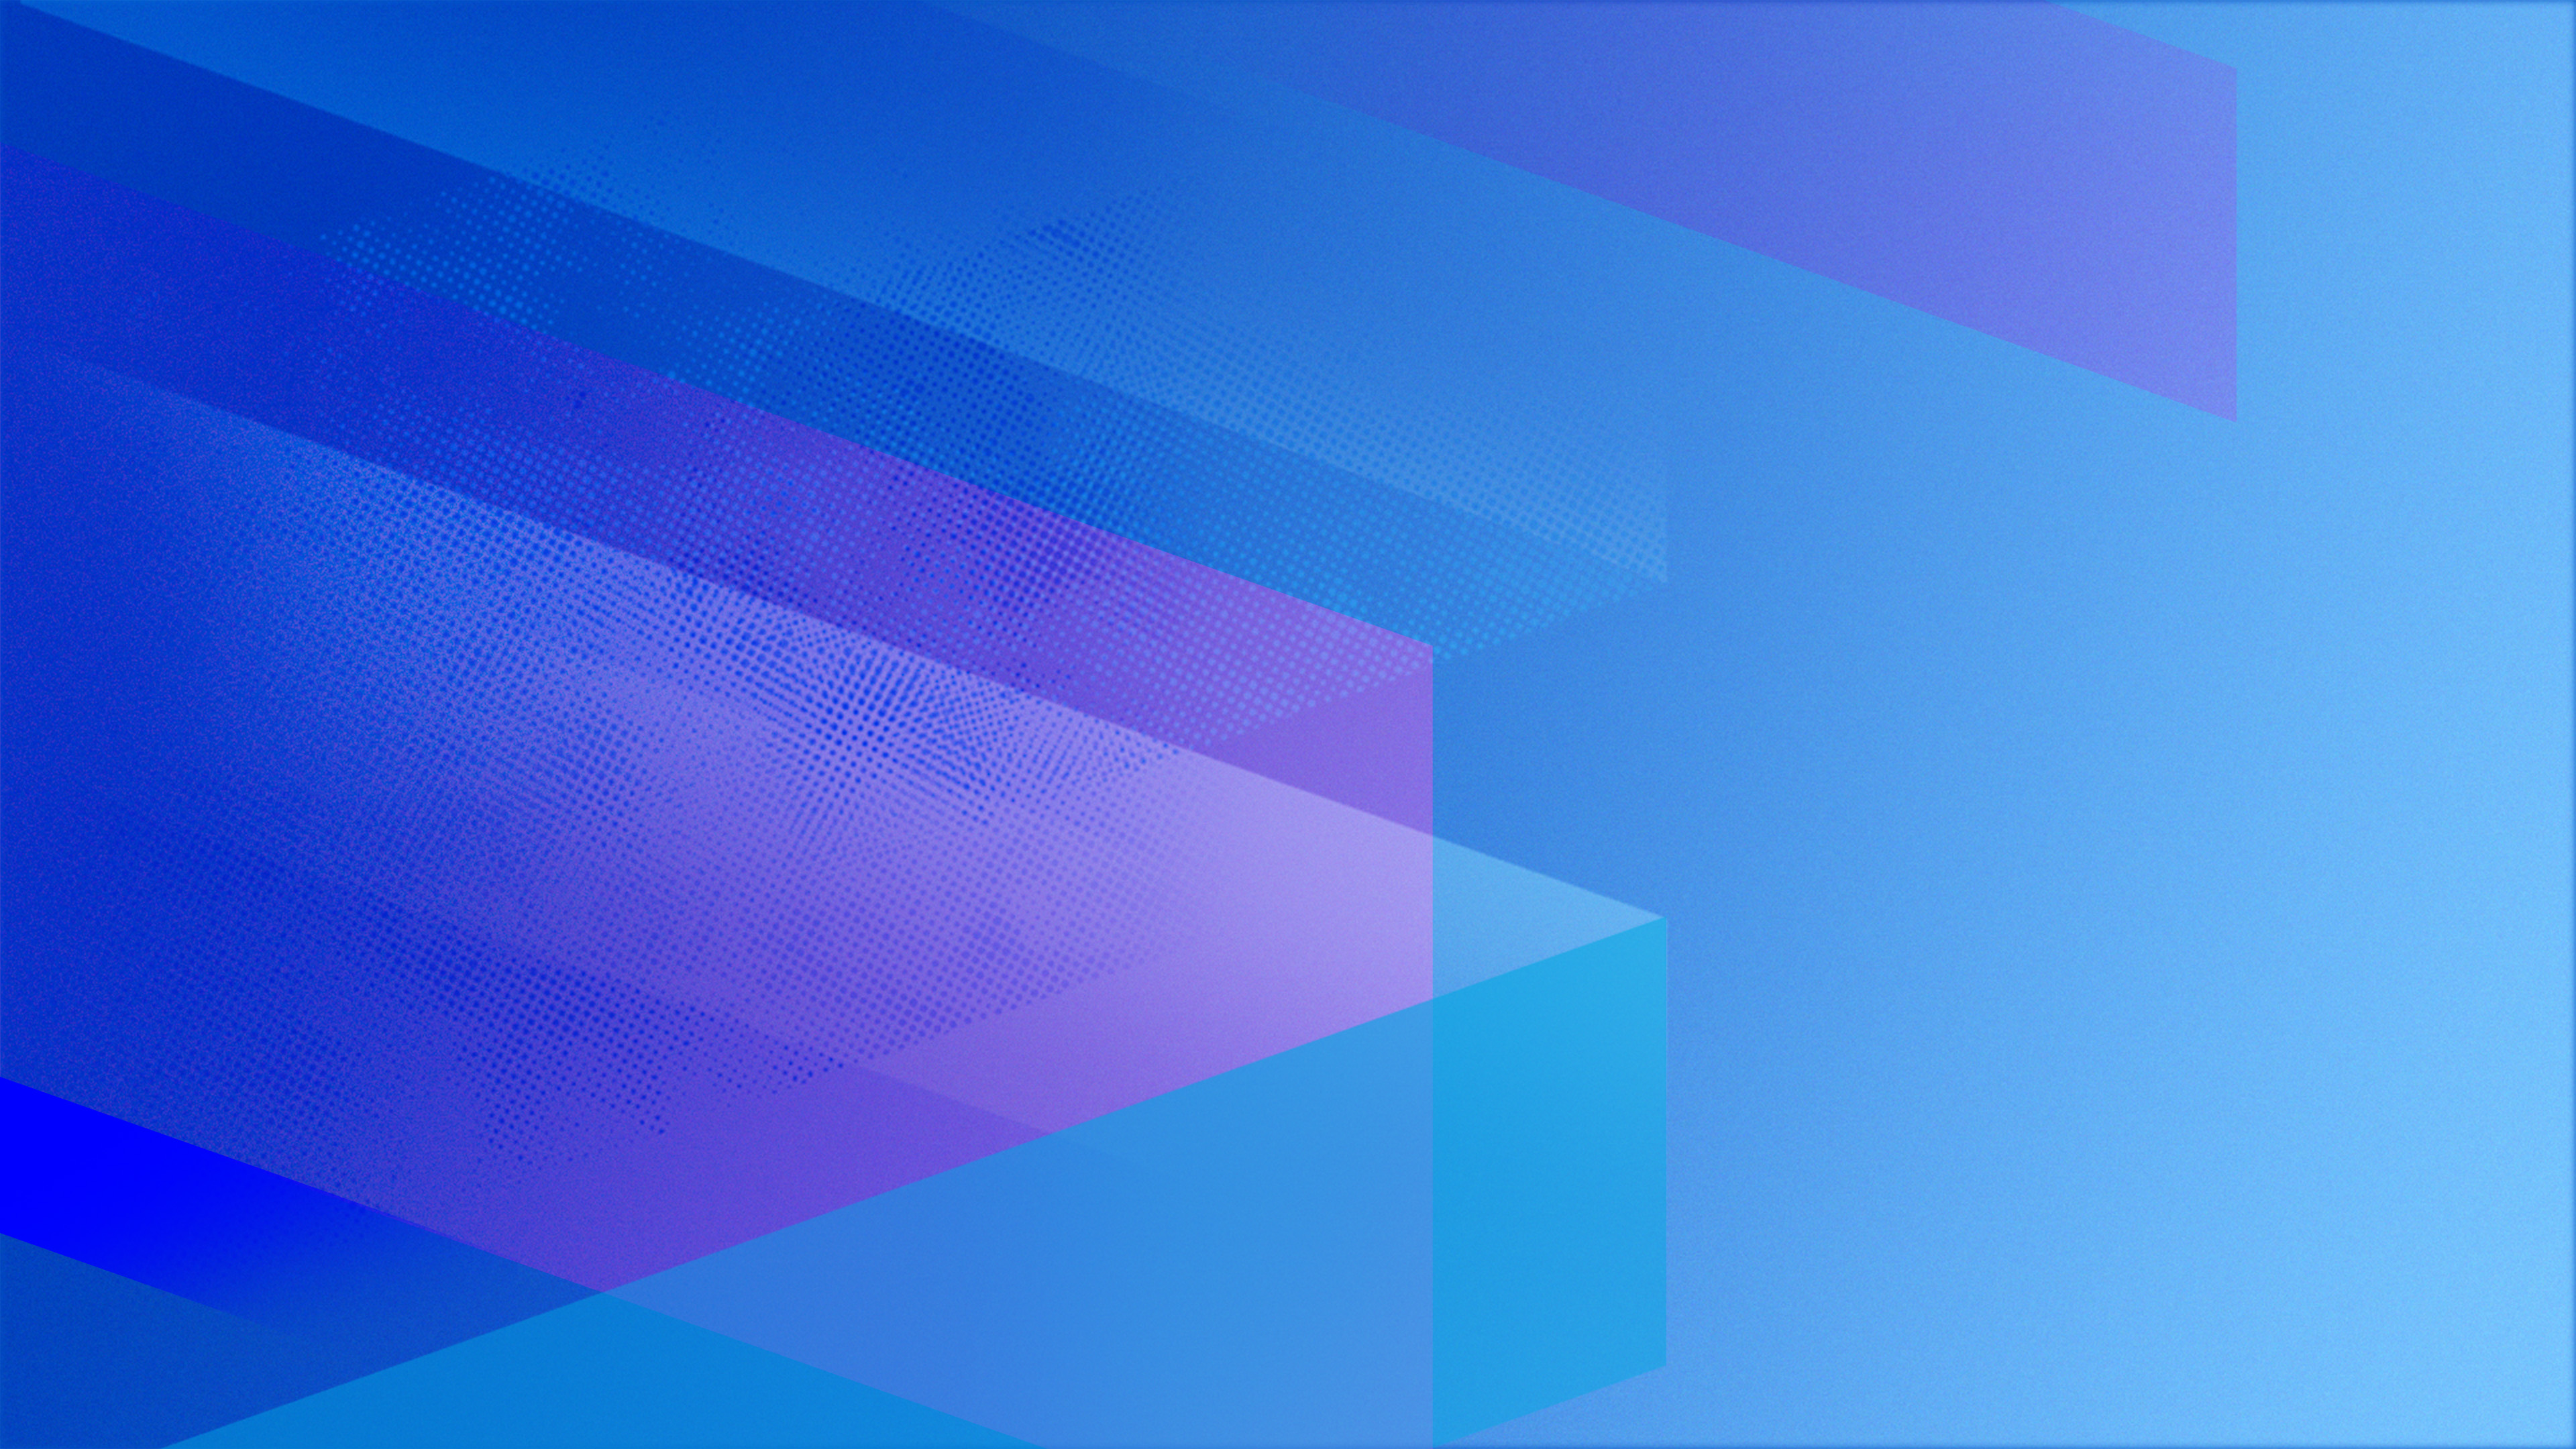 Angular geometric pattern with a blue gradient background